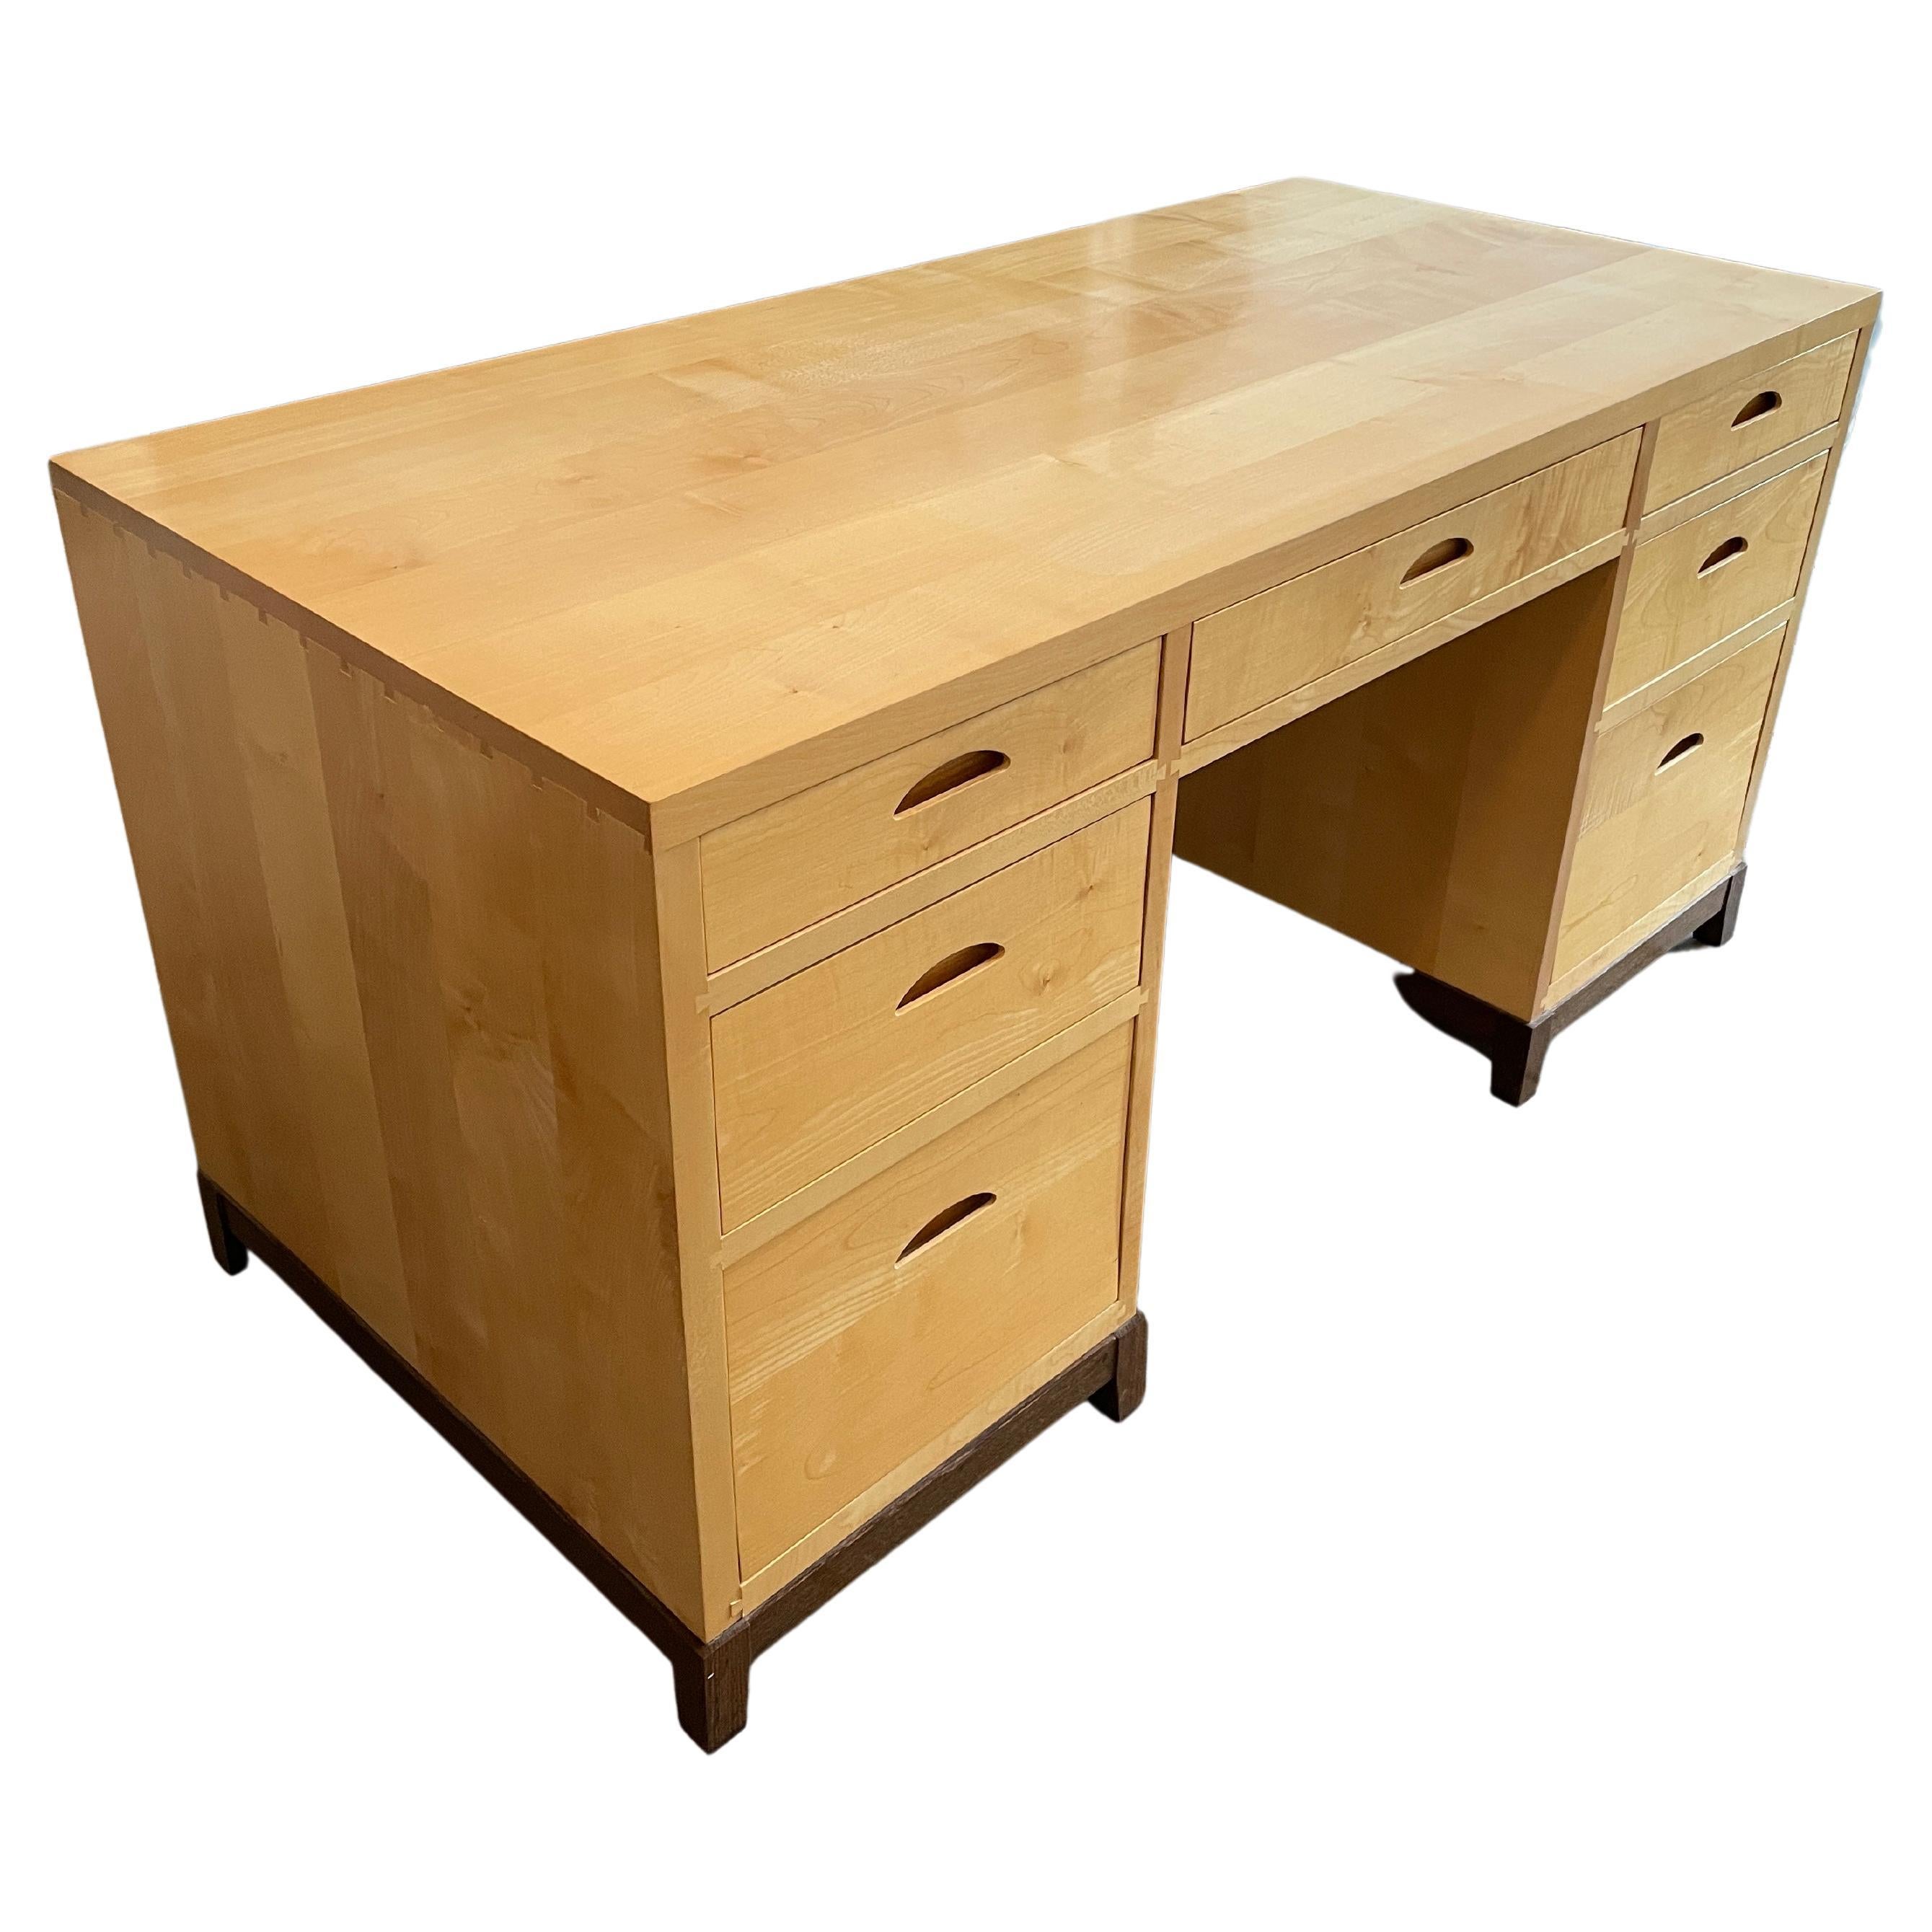 Beautiful Unique American Studio craft custom woodworker made 7 drawer knee hole Solid Blonde Maple desk. Scandinavian inspired design and inset carved handles with Japanese influenced joints used throughout the desk construction. Very clean inside